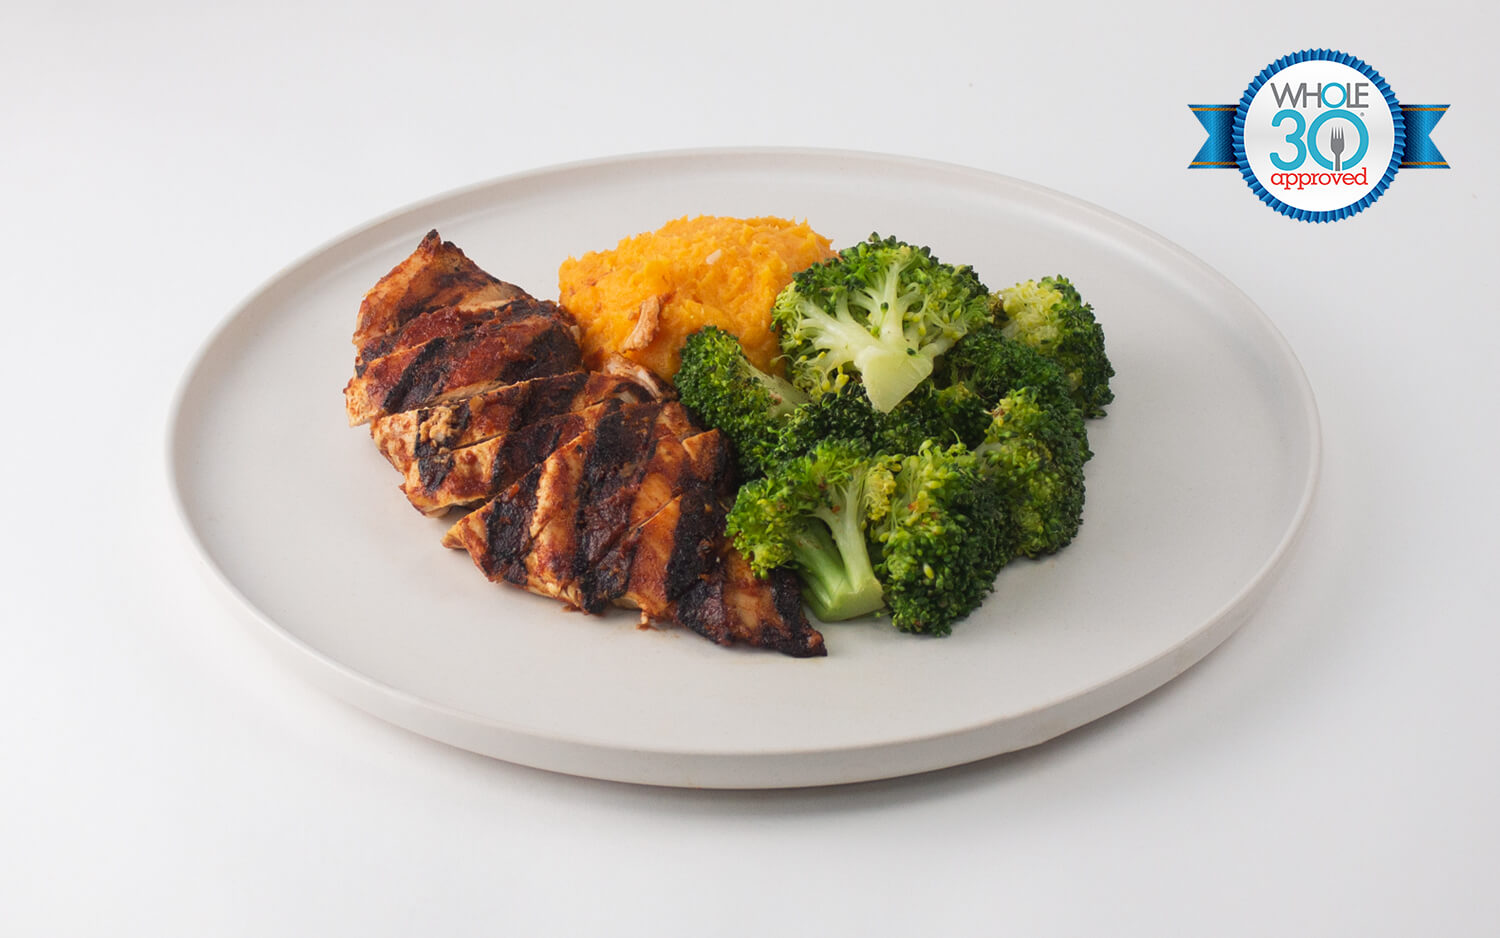 Grilled BBQ Chicken served with sweet potato mash and broccoli